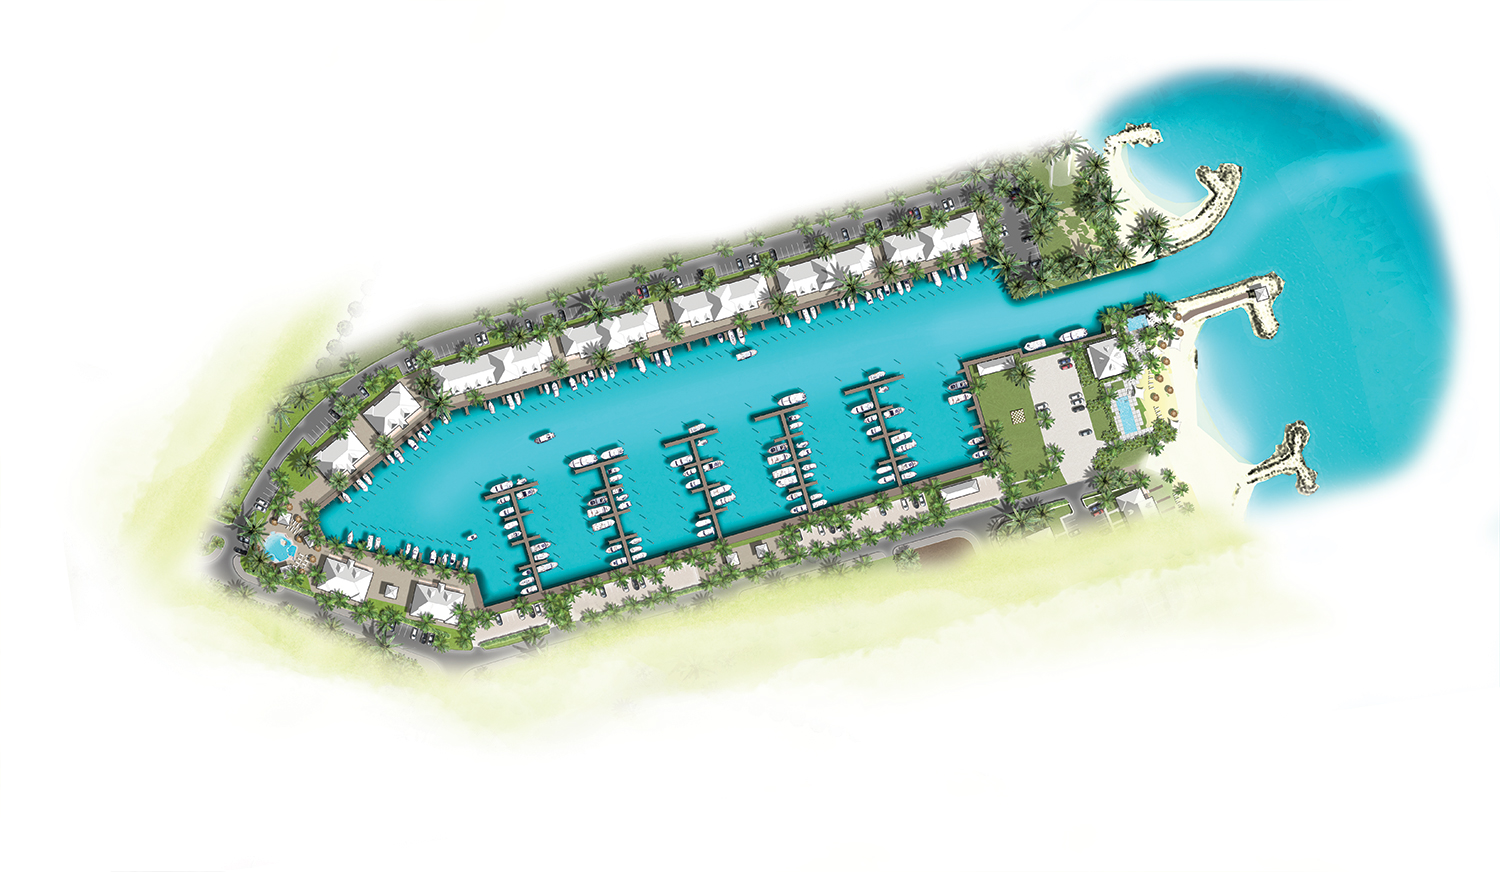 The Marina at Palm Cay rendering